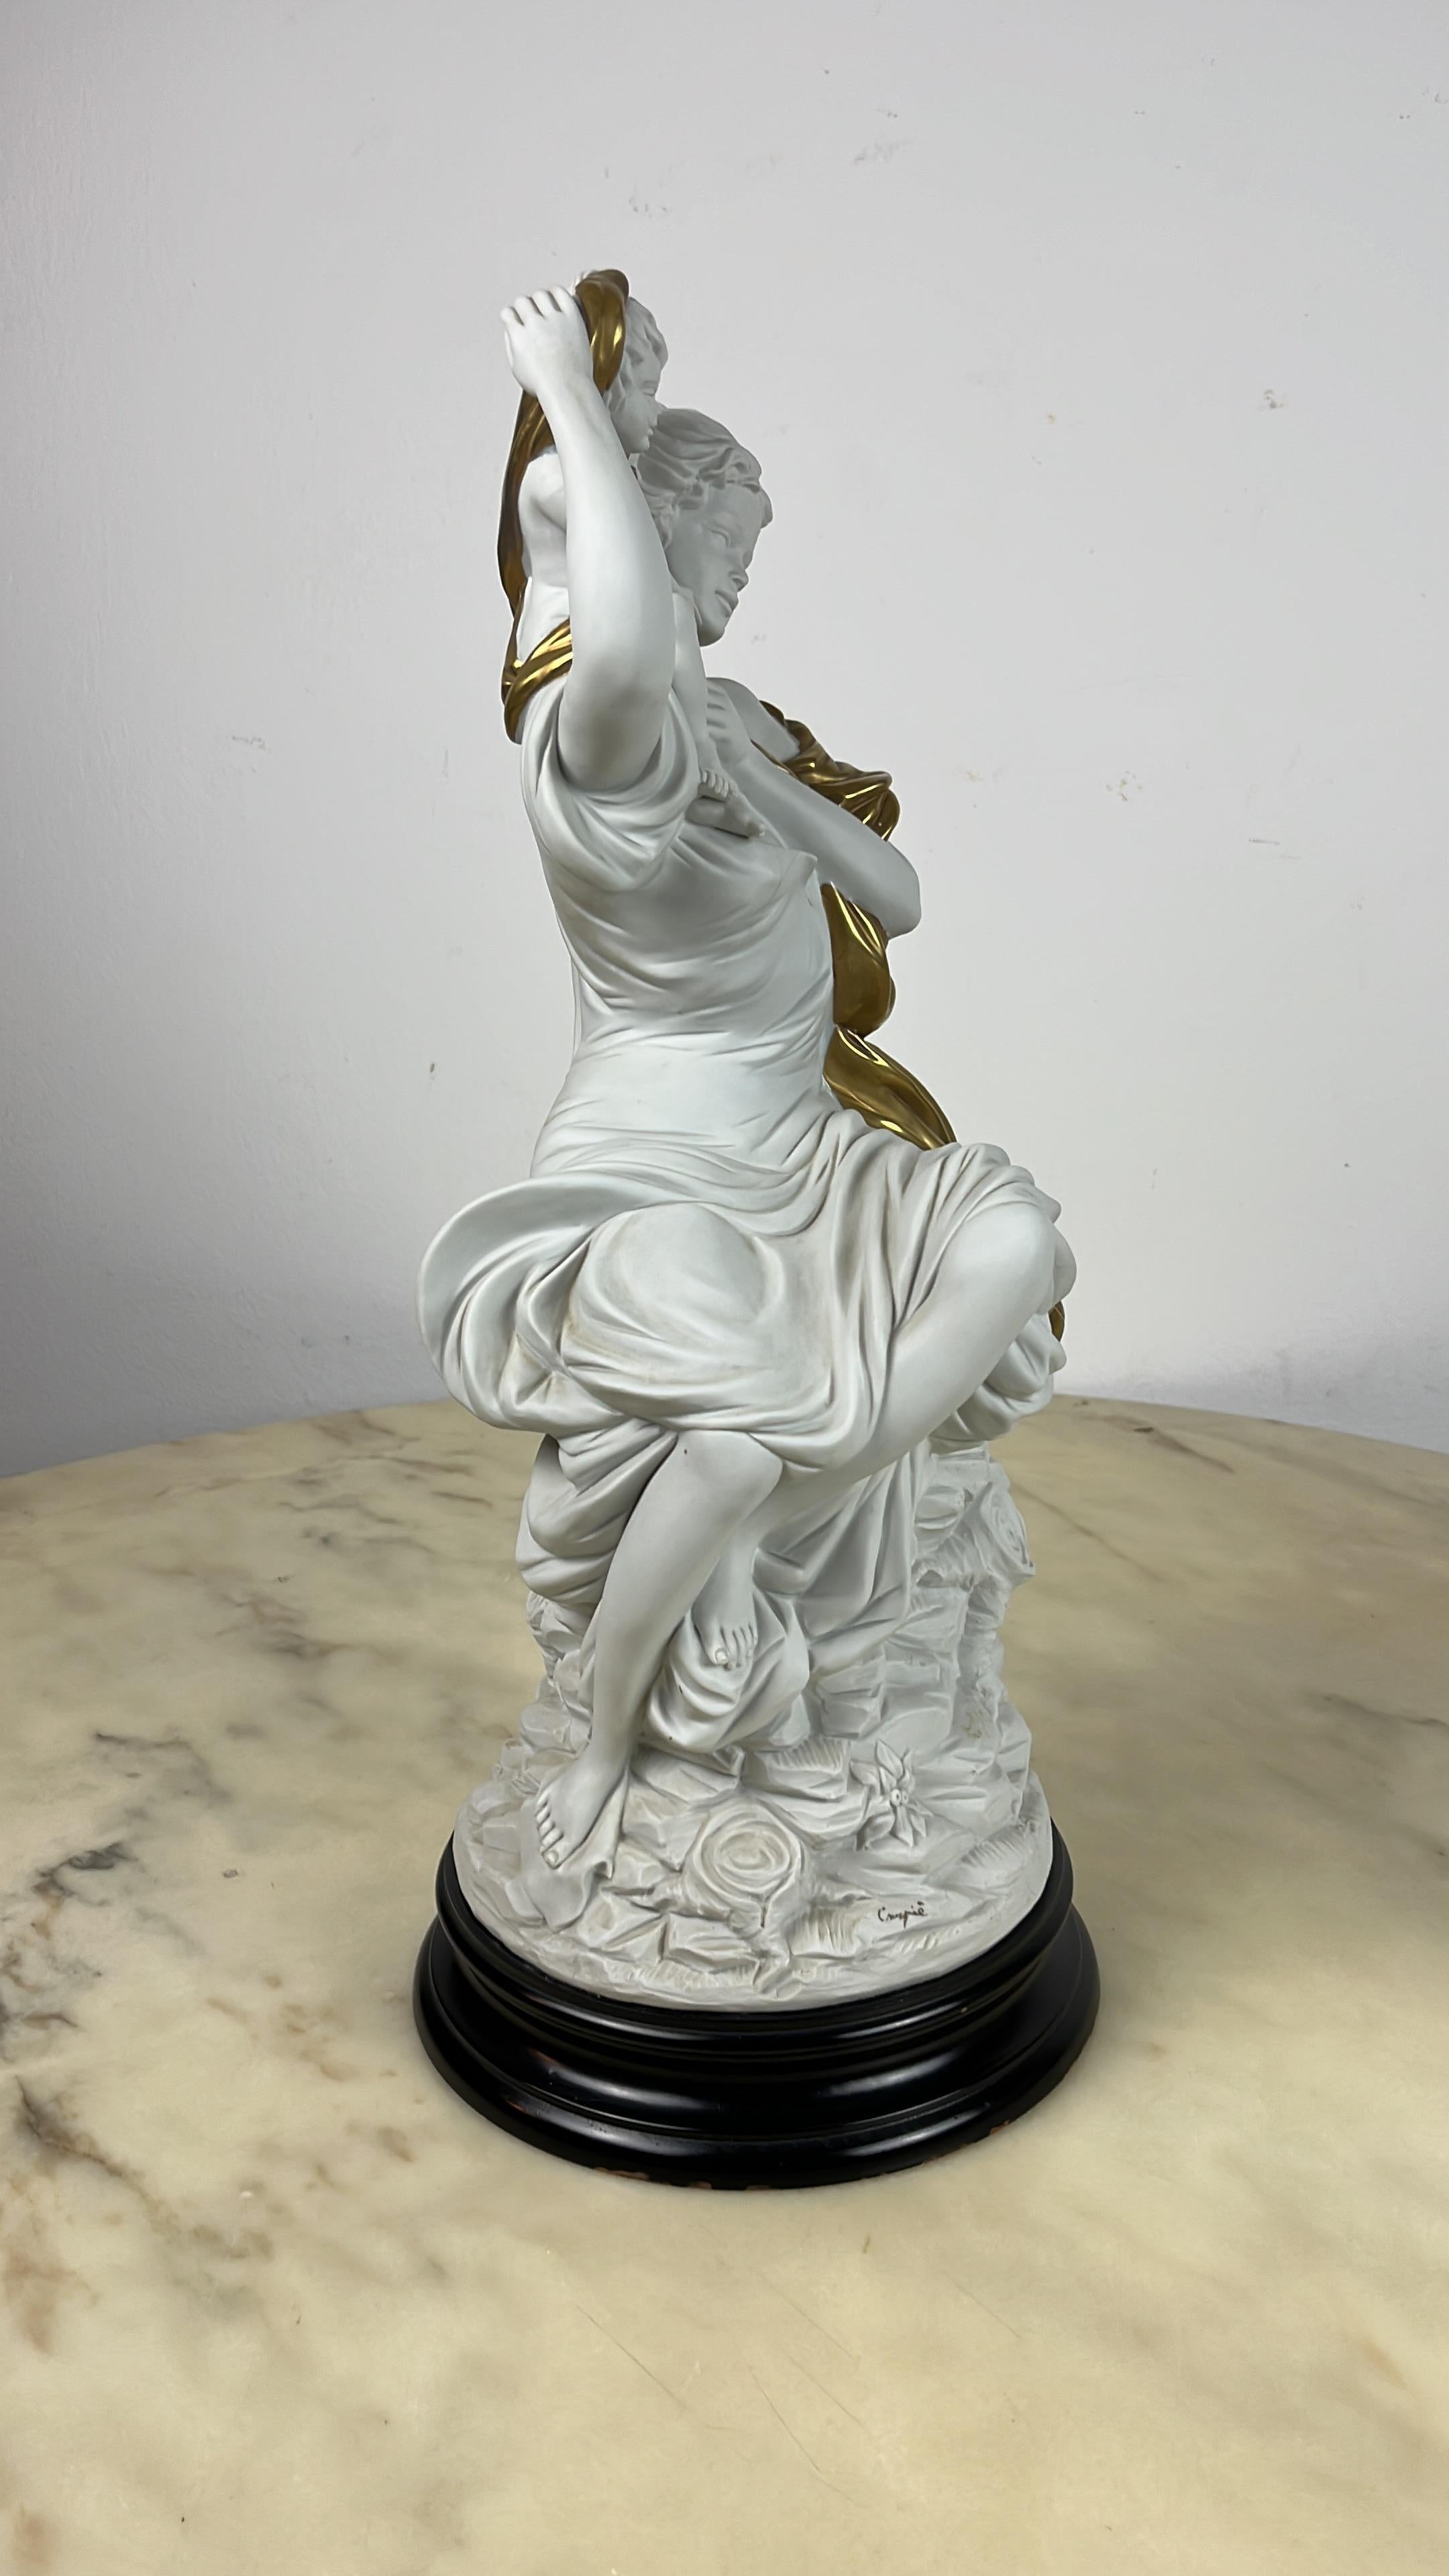 Large Carpiè Porcelain Statue, Made in Italy, 1970s For Sale 8